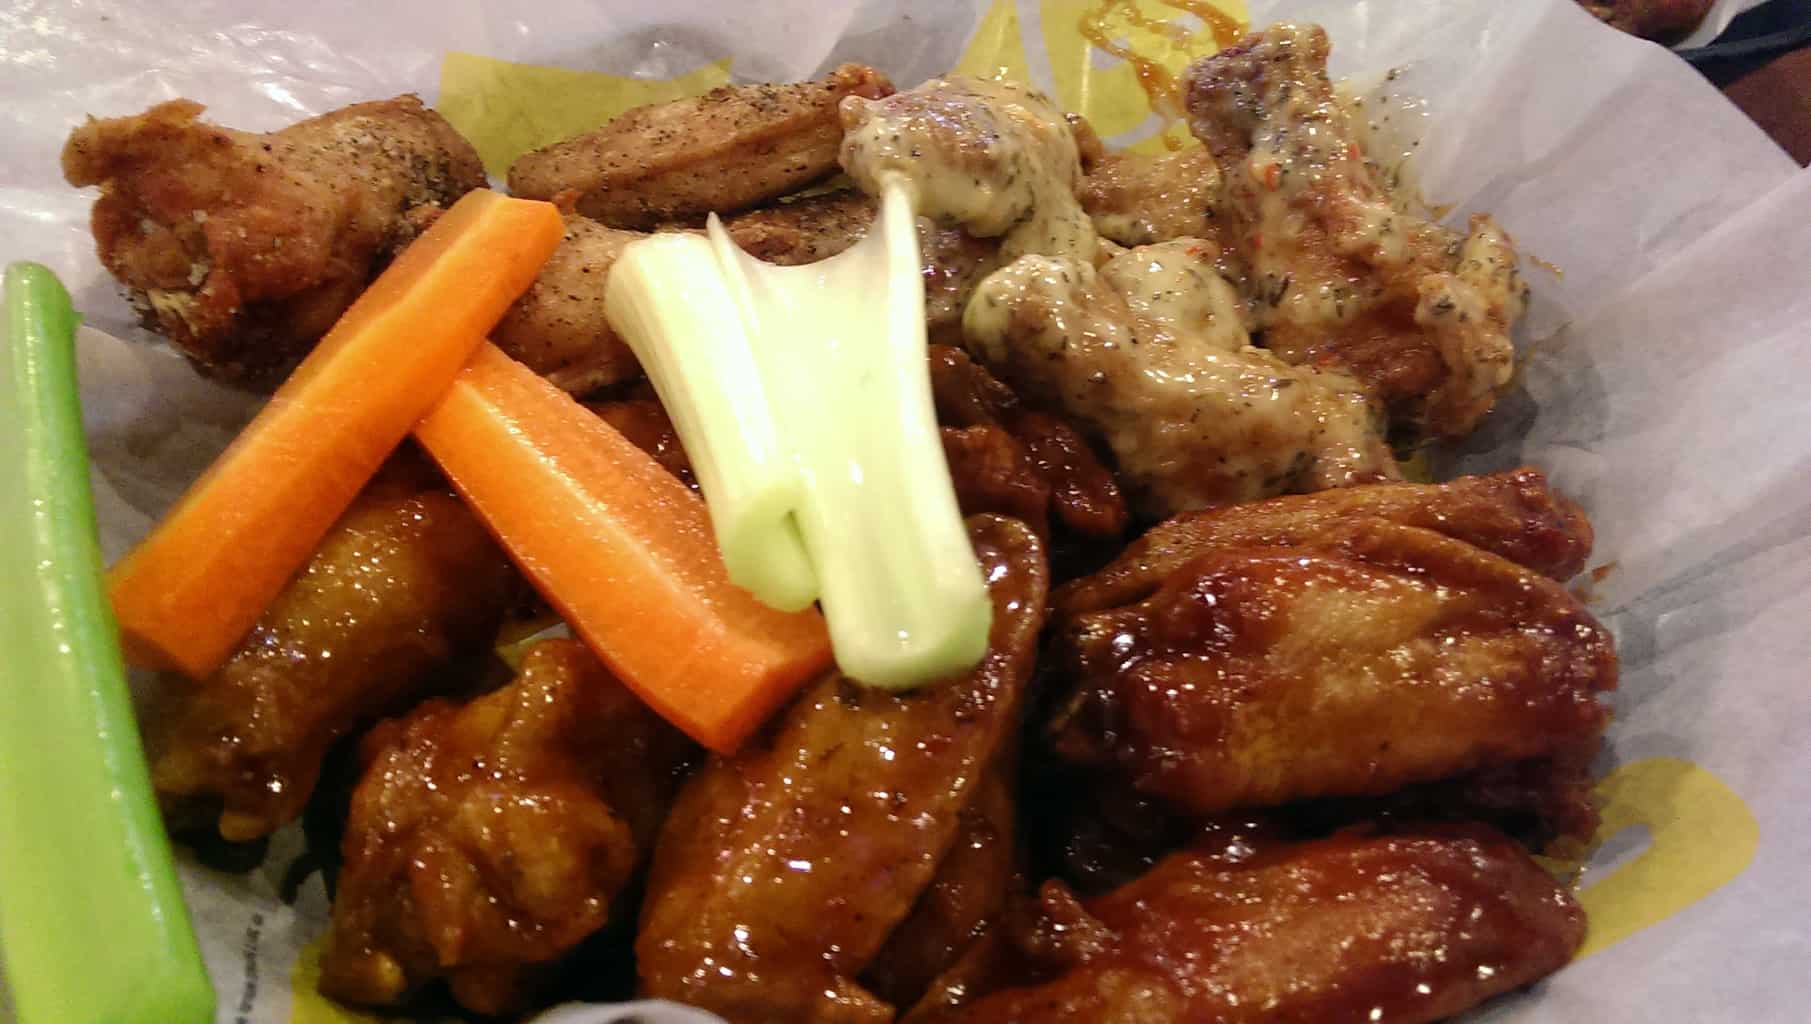 "Double" size traditional wings with salt and pepper, parmesan garlic, honey bbq, and jammin jalapeno sauces. (starting from top left corner, clockwise)